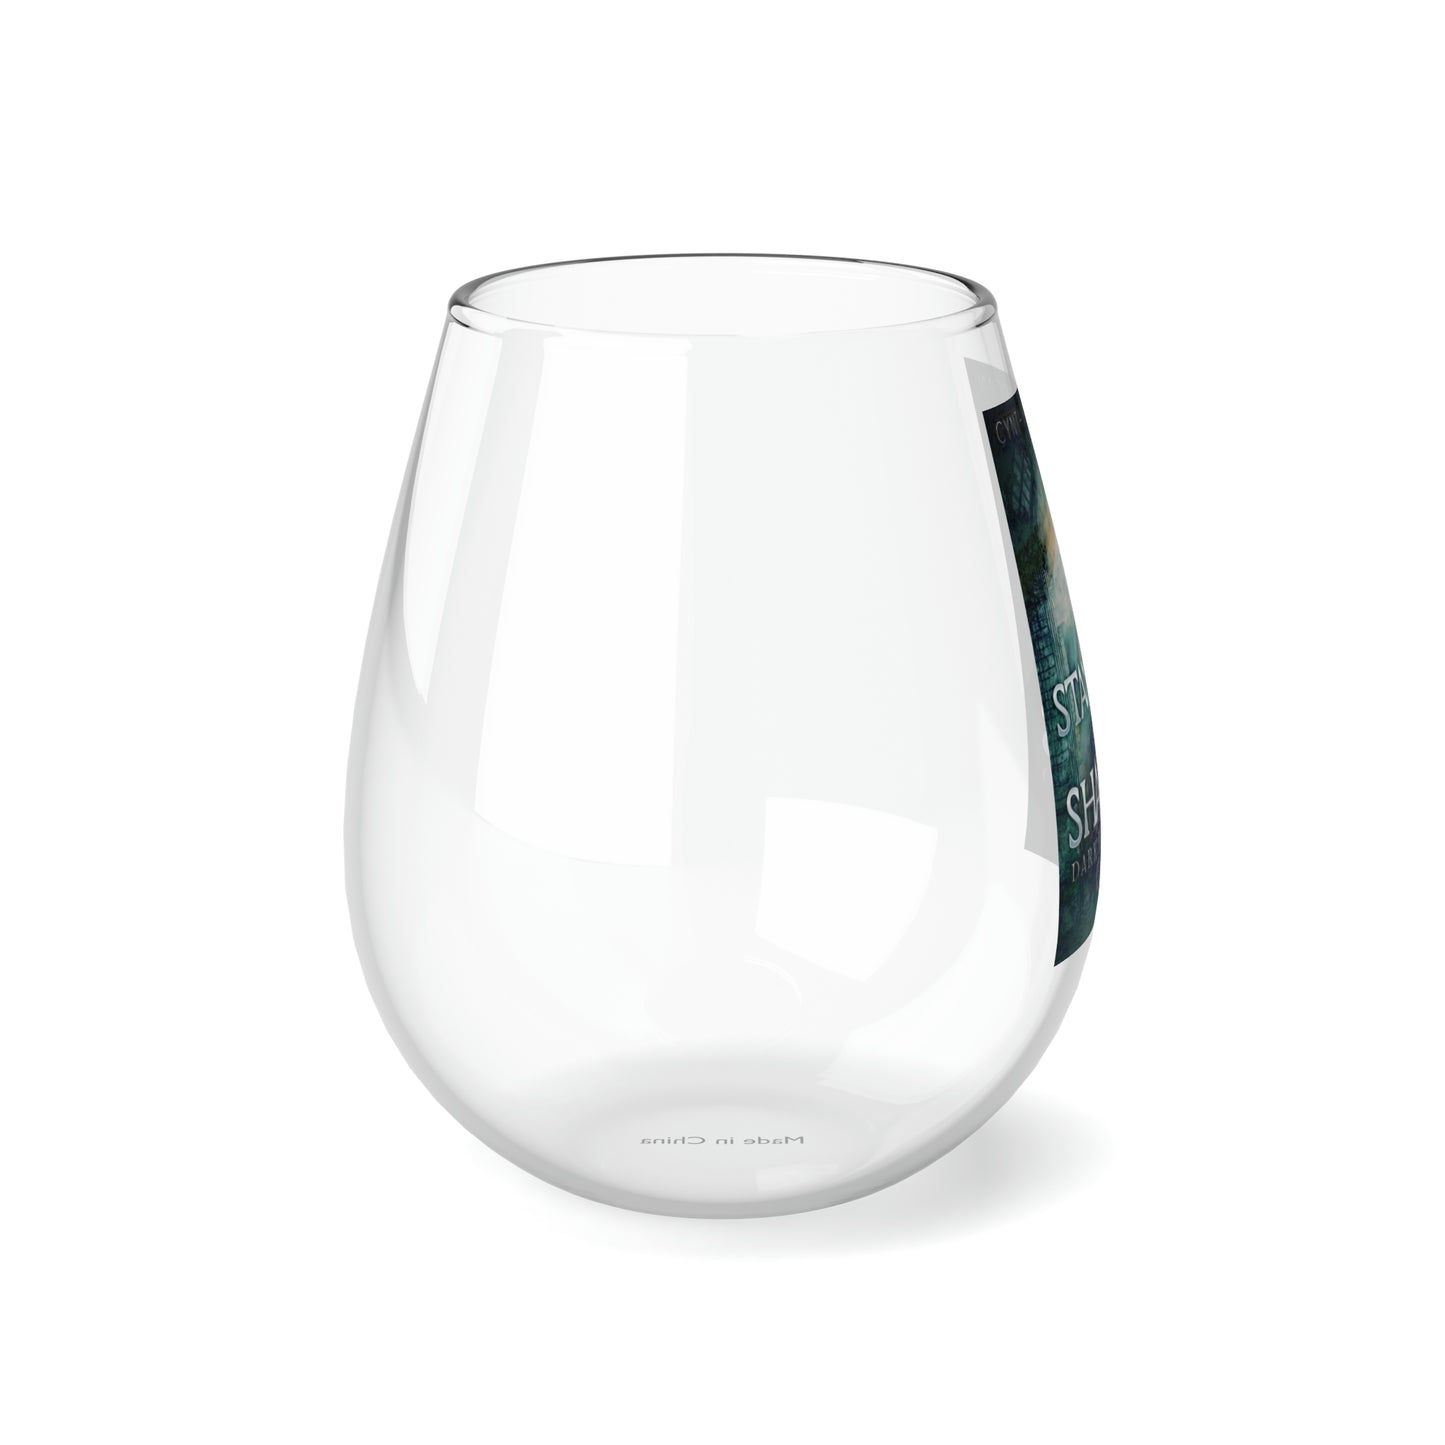 Standing in Shadows - Stemless Wine Glass, 11.75oz